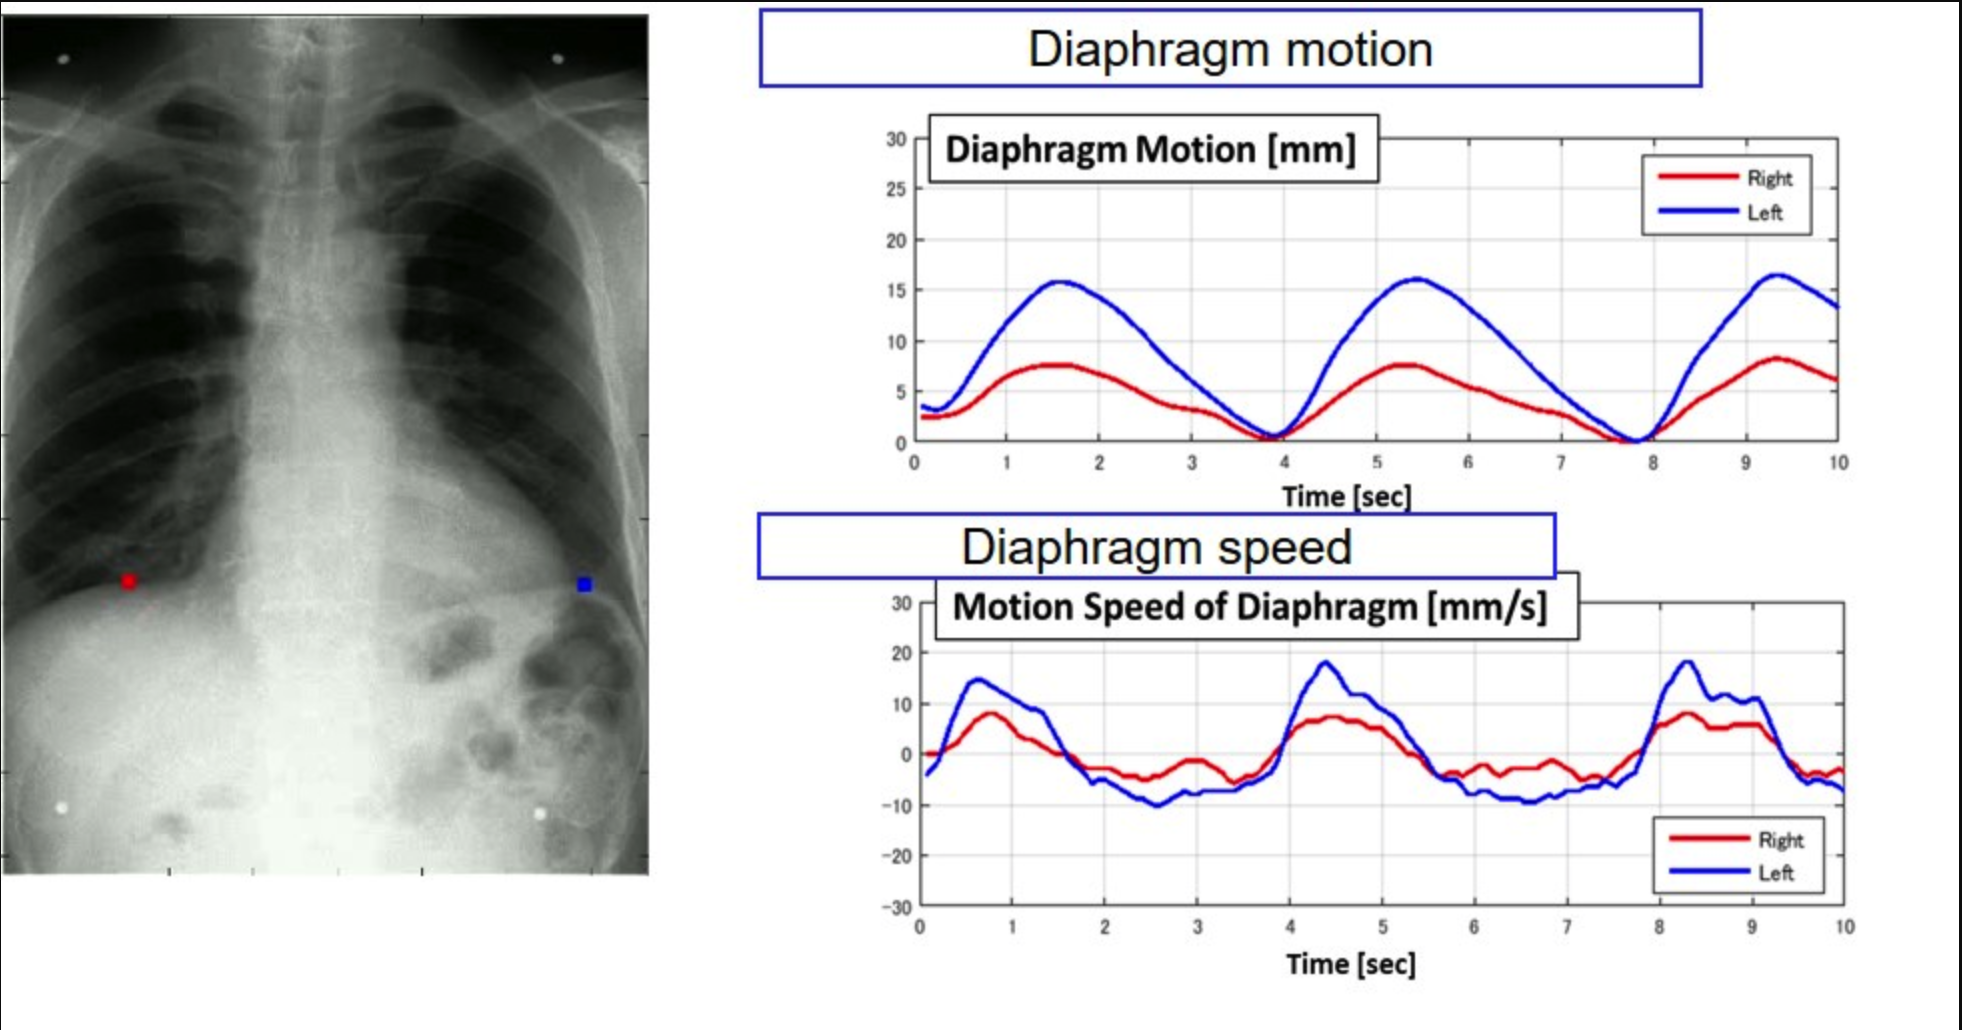 diaphragm motion recorded with DDR 